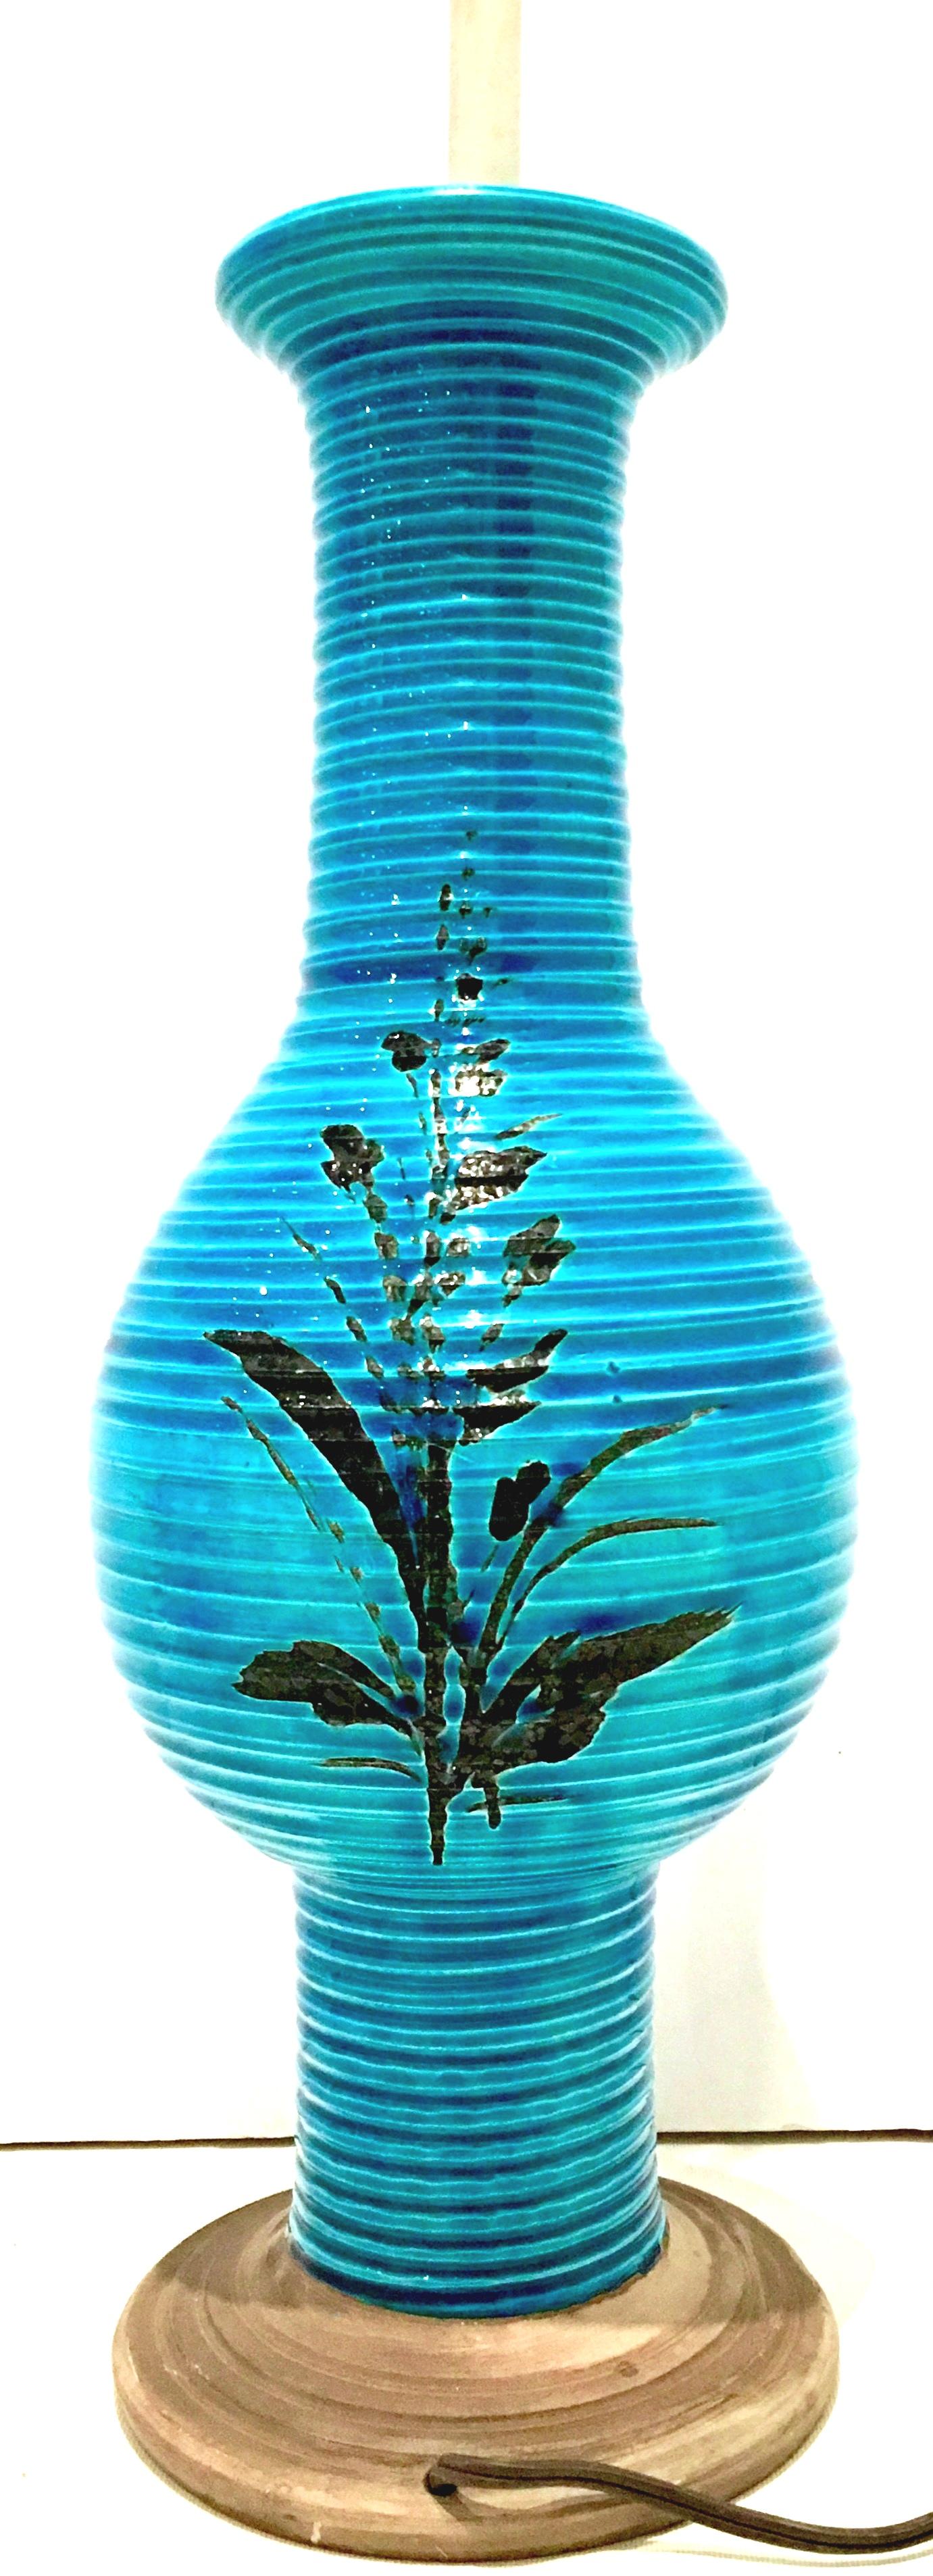 20th Century 1960s Italian Cerulean Blue and Black Ceramic Glaze Pottery Lamp by, Bitossi For Sale